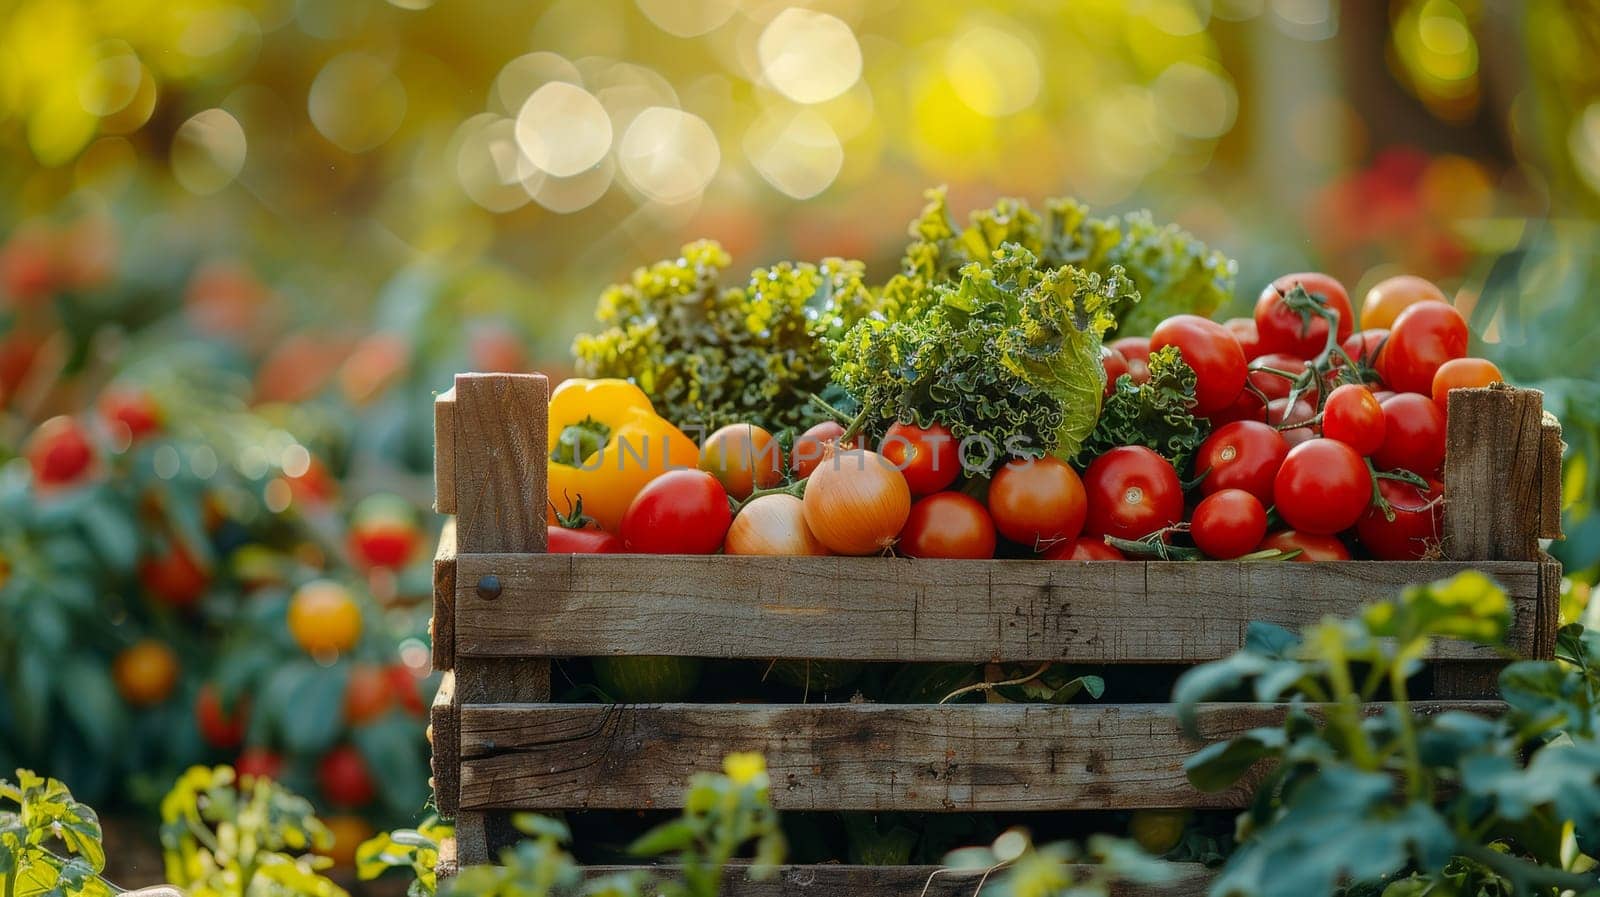 A woman is holding a basket of vegetables, including tomatoes, broccoli, and carrots. The basket is placed on her lap, and she is in a garden setting. Concept of freshness and abundance